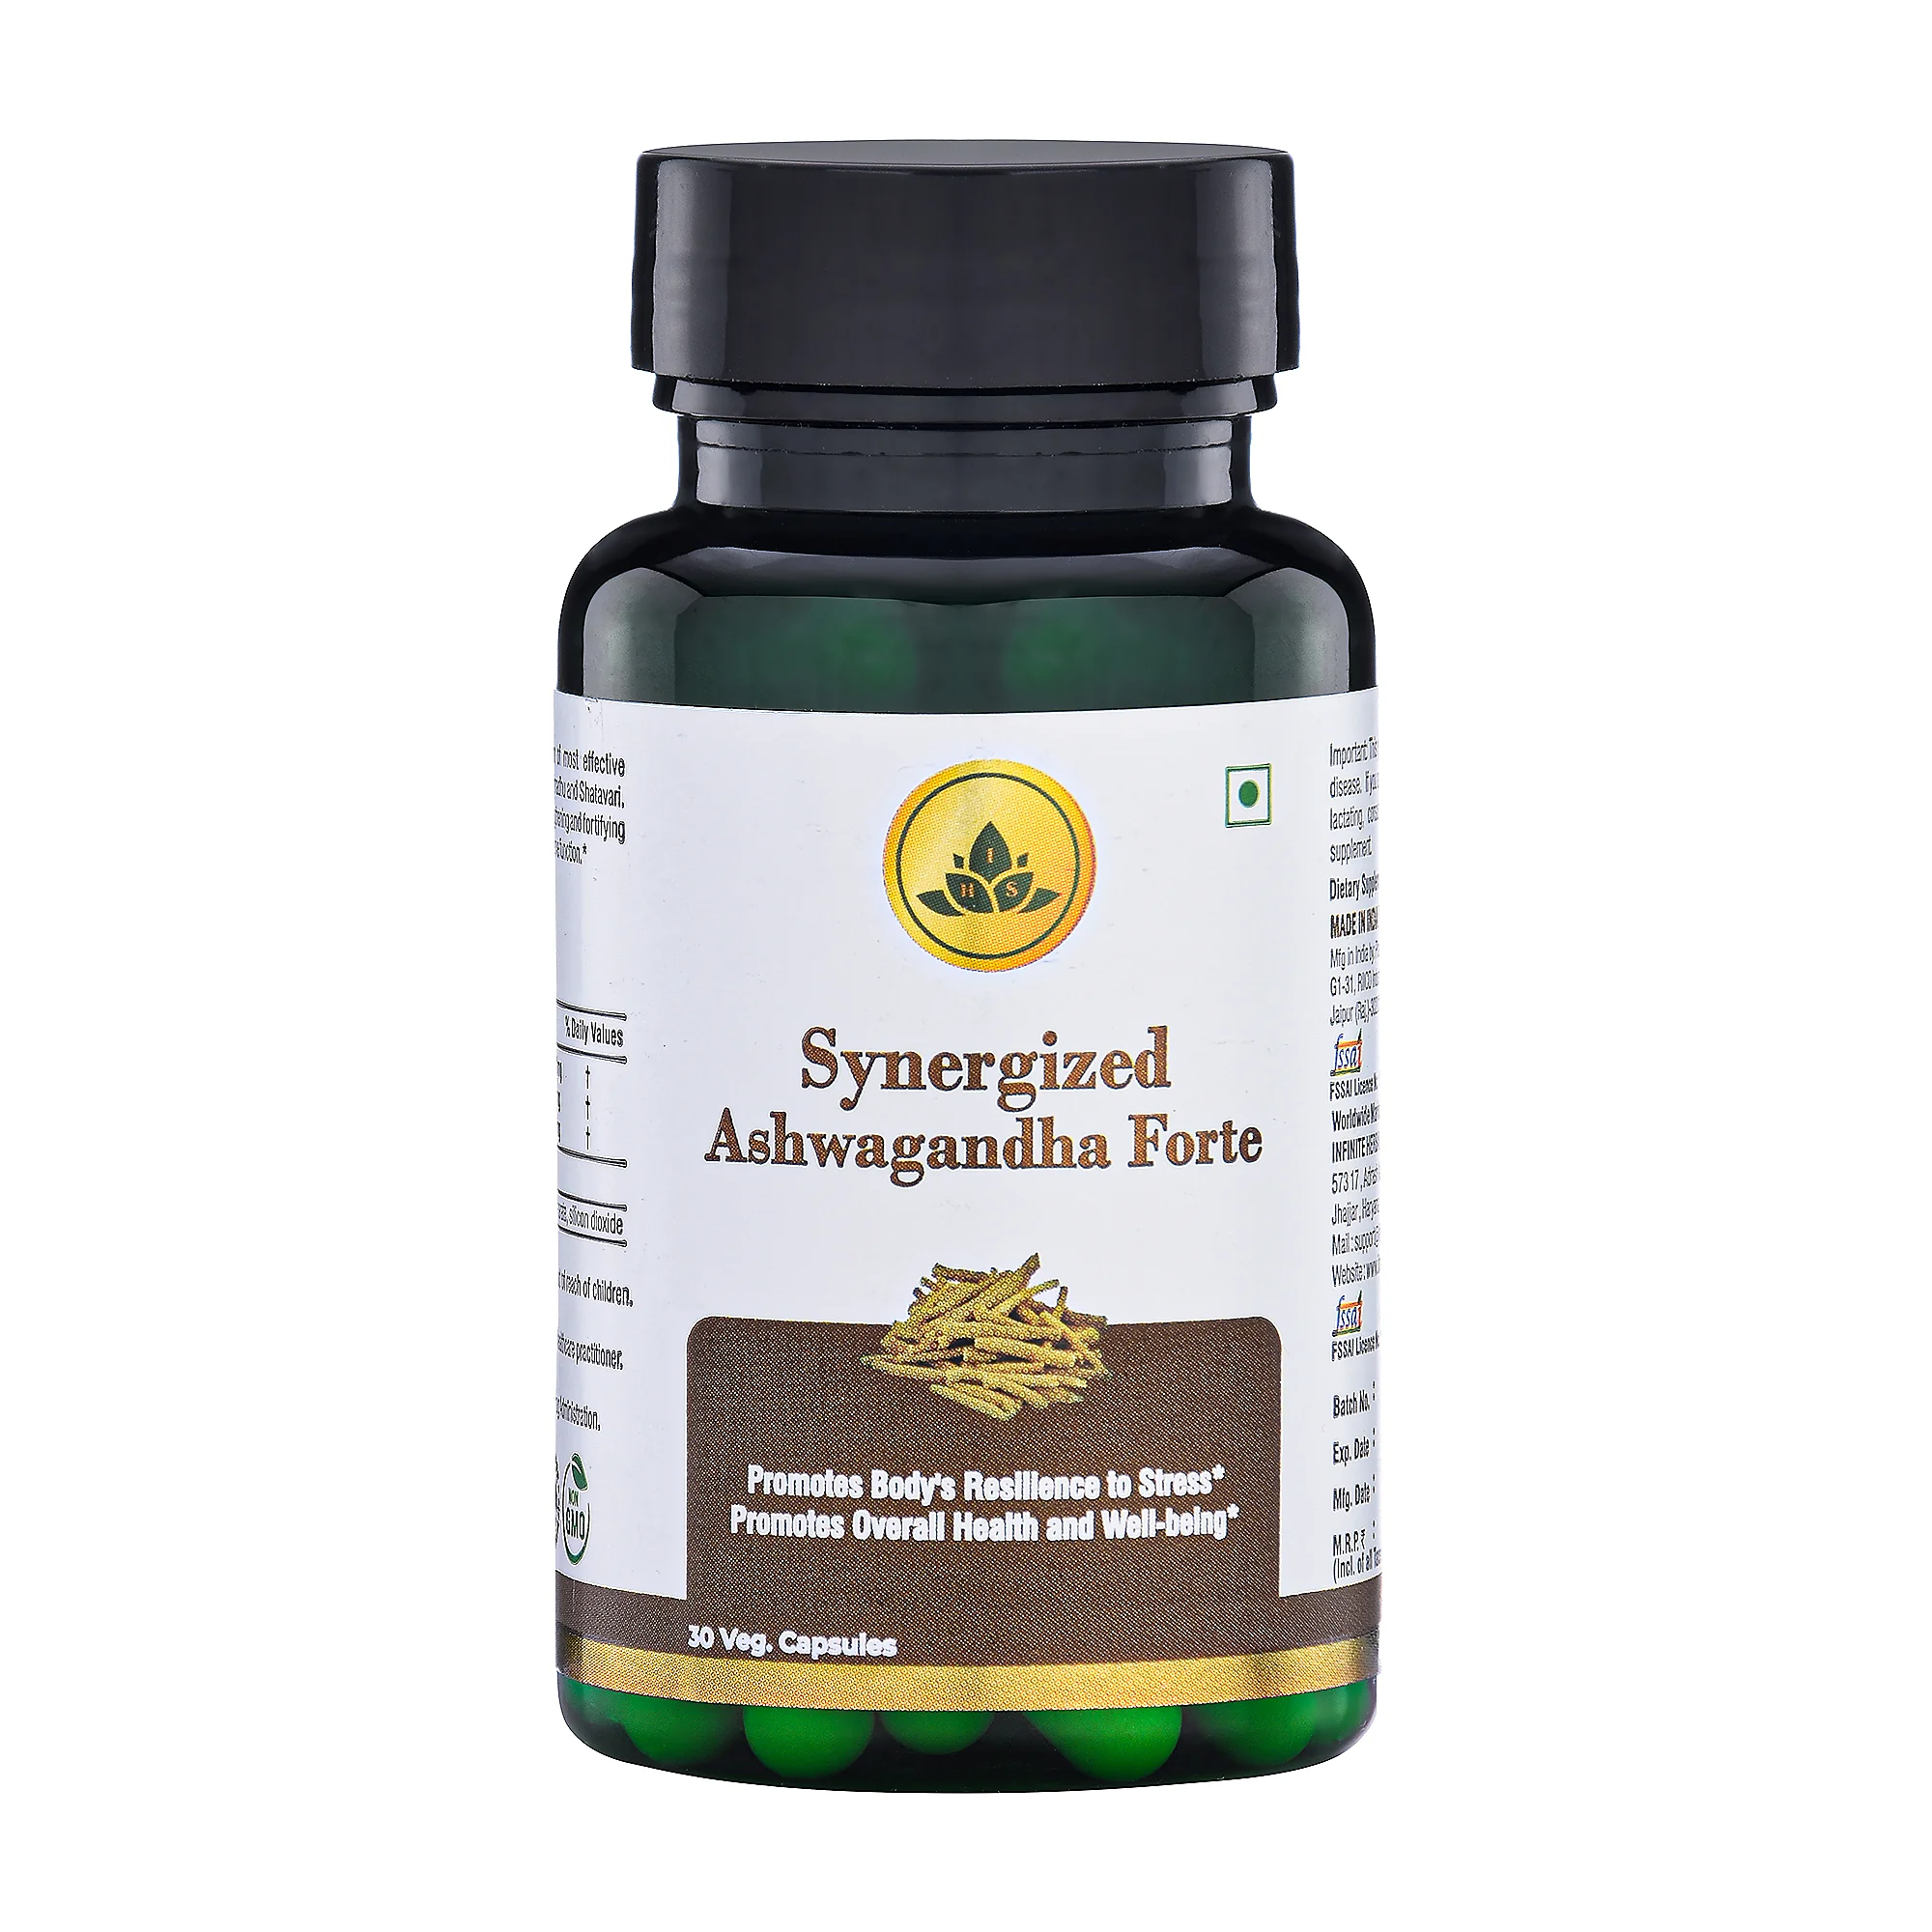  Synergized Ashwagandha Forte  Herbs For Brain Cell Regeneration